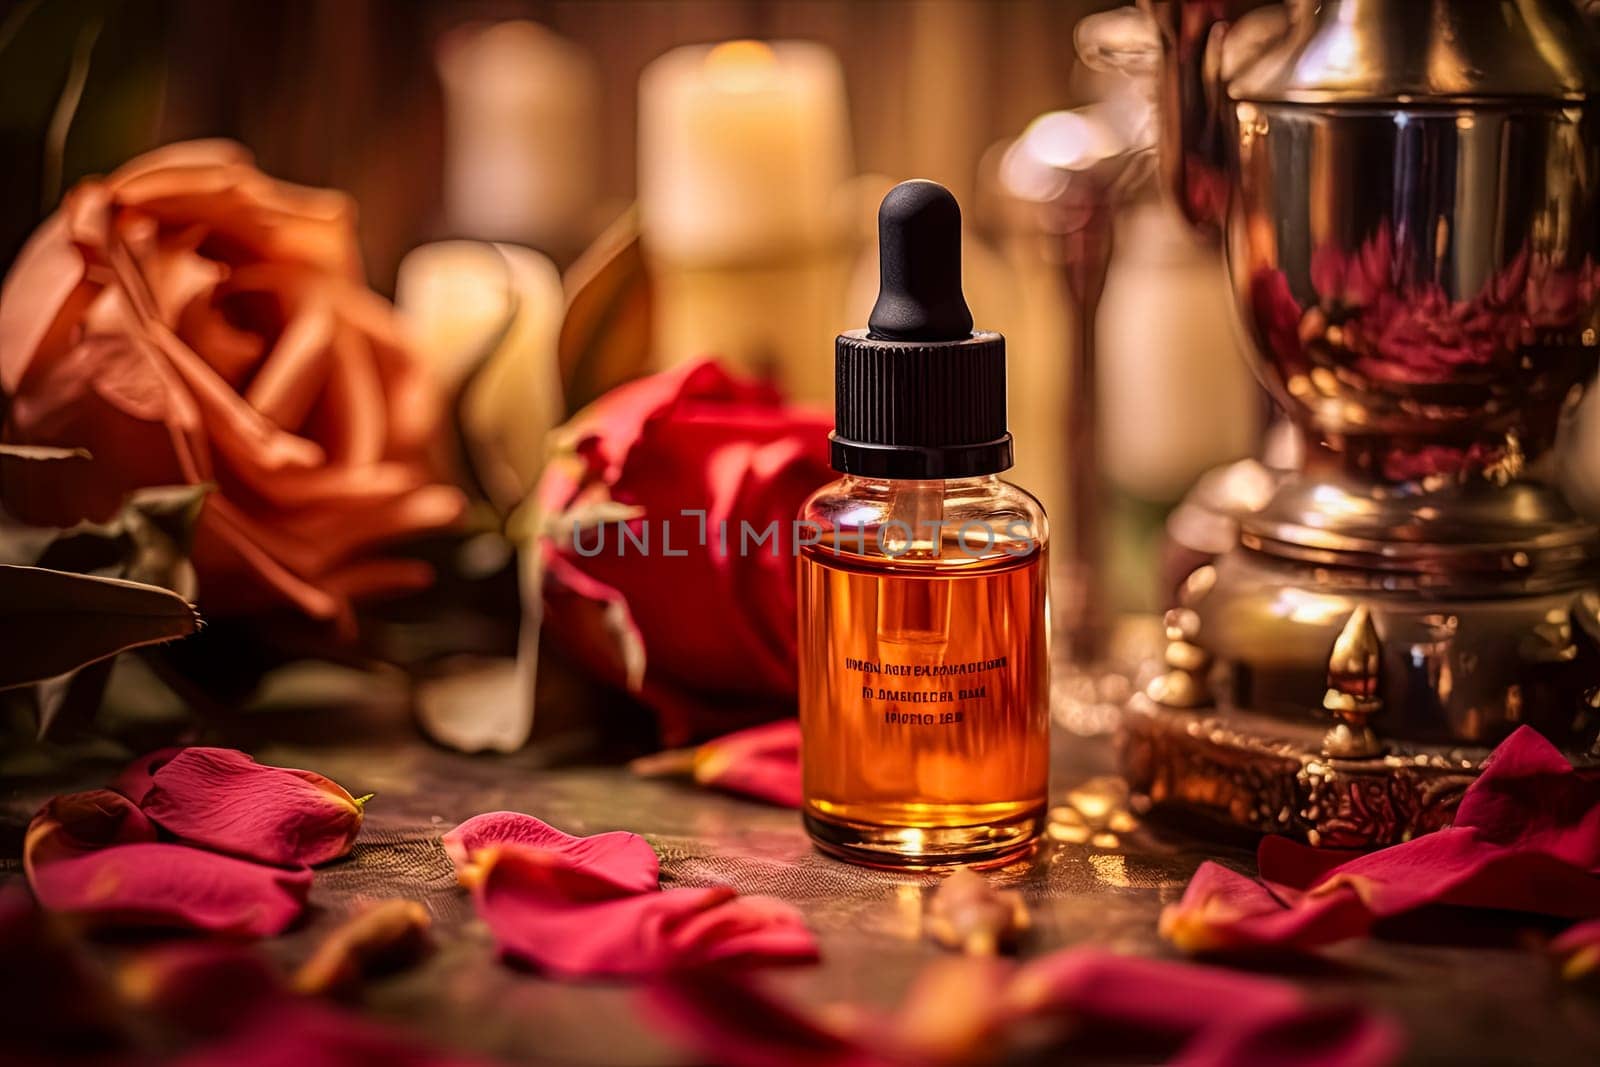 A bottle of perfume with tea rose extract rests on a table adorned with a bunch of strawberries and leaves, evoking a fresh and floral fragrance.